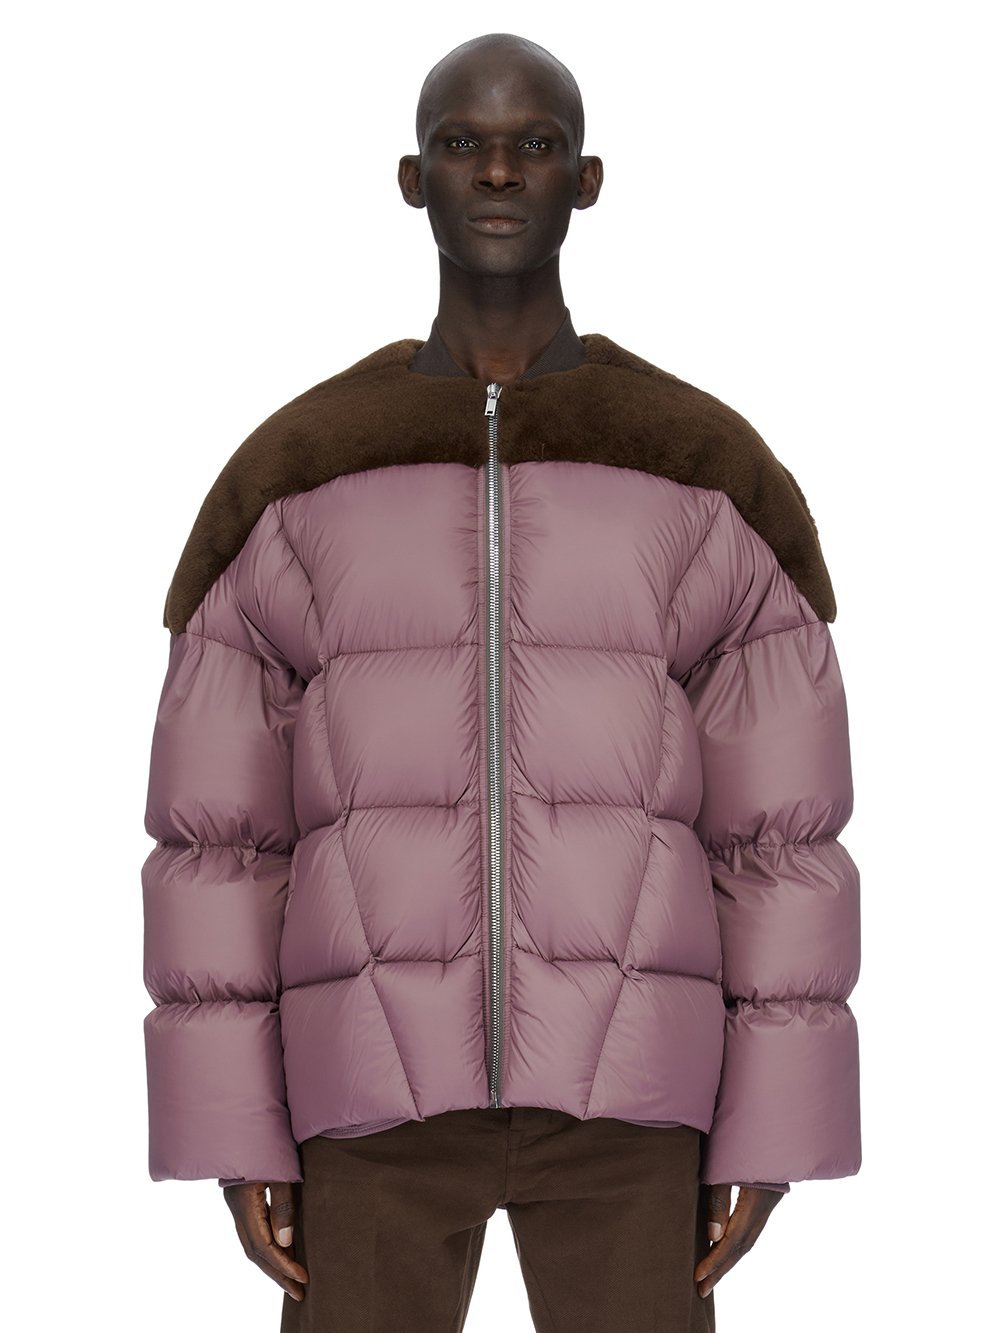 RICK OWENS FW23 LUXOR FLIGHT JKT IN BROWN AND AMETHYST BUTTER LAMB SHEARLING AND RECYCLED NYLON